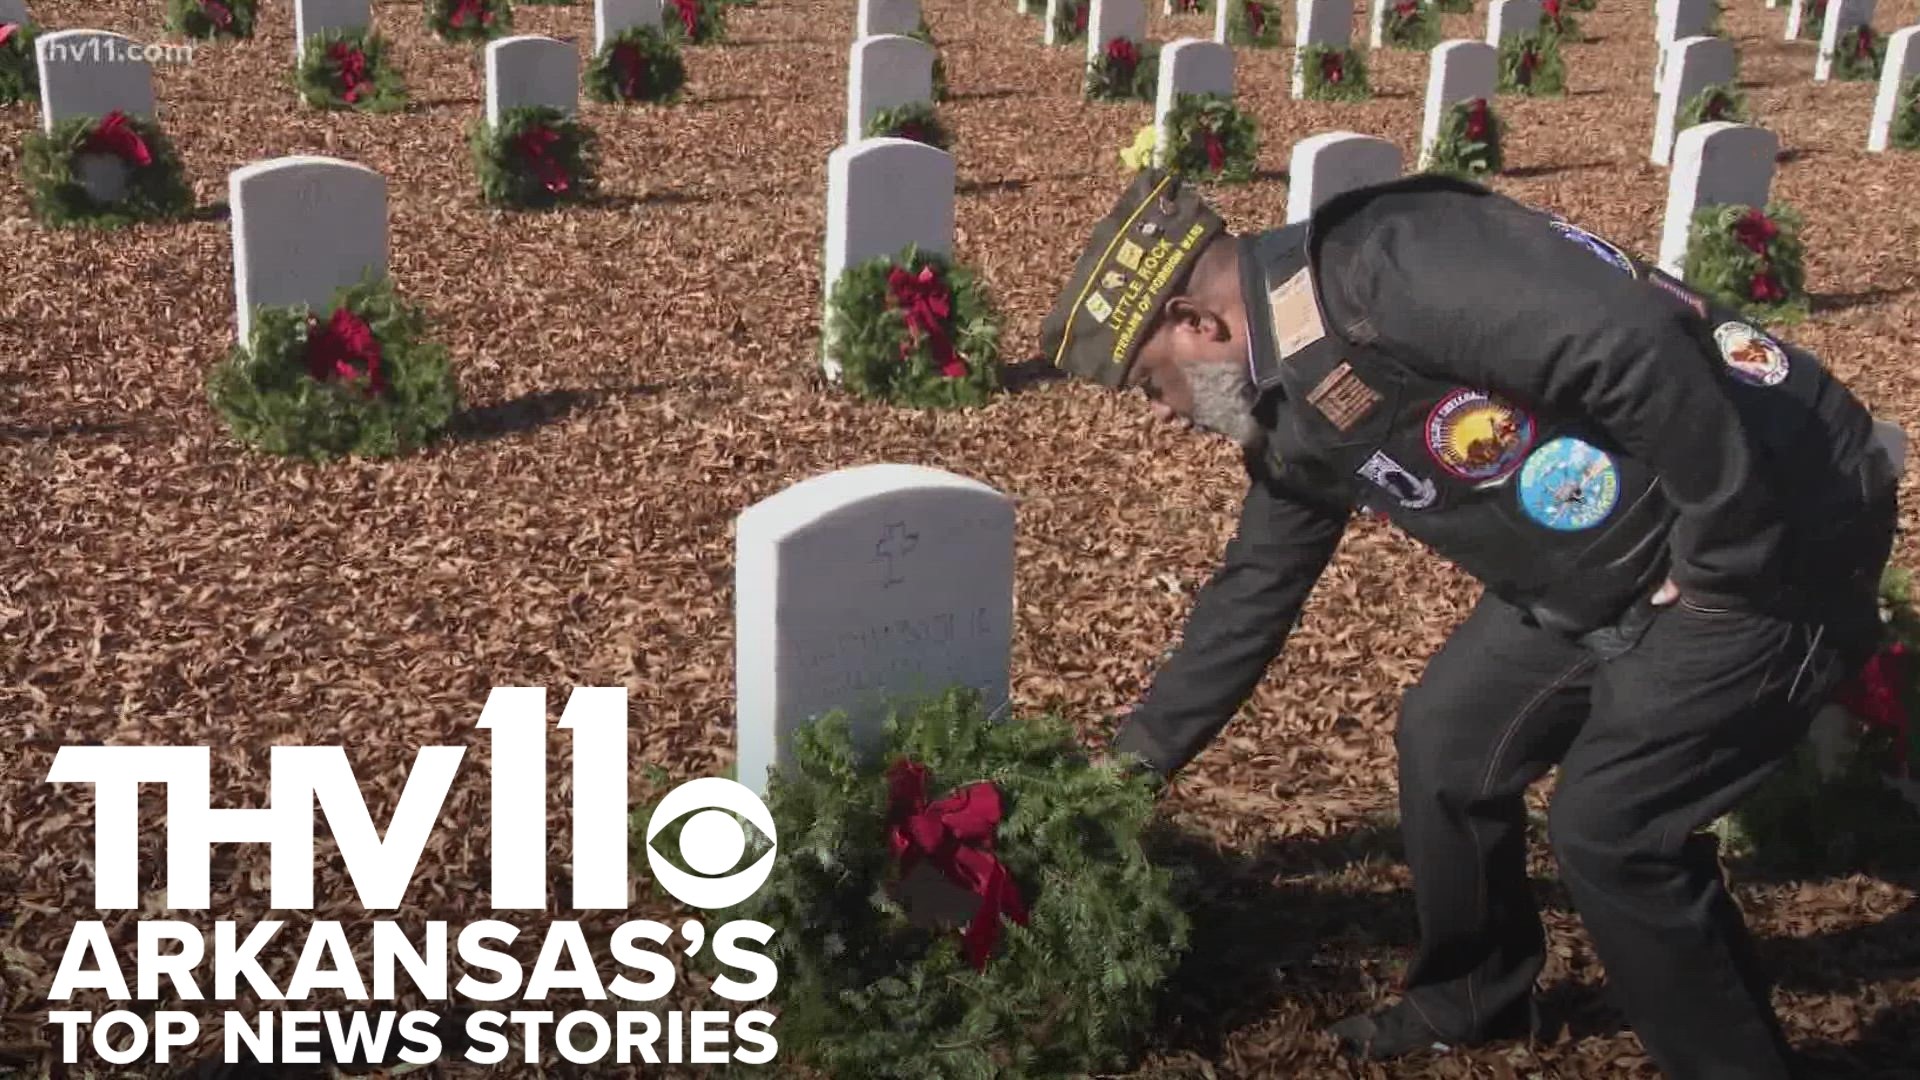 Ashley Godwin provides the top news stories for Dec. 17, 2022, including the remembrance of fallen heroes.